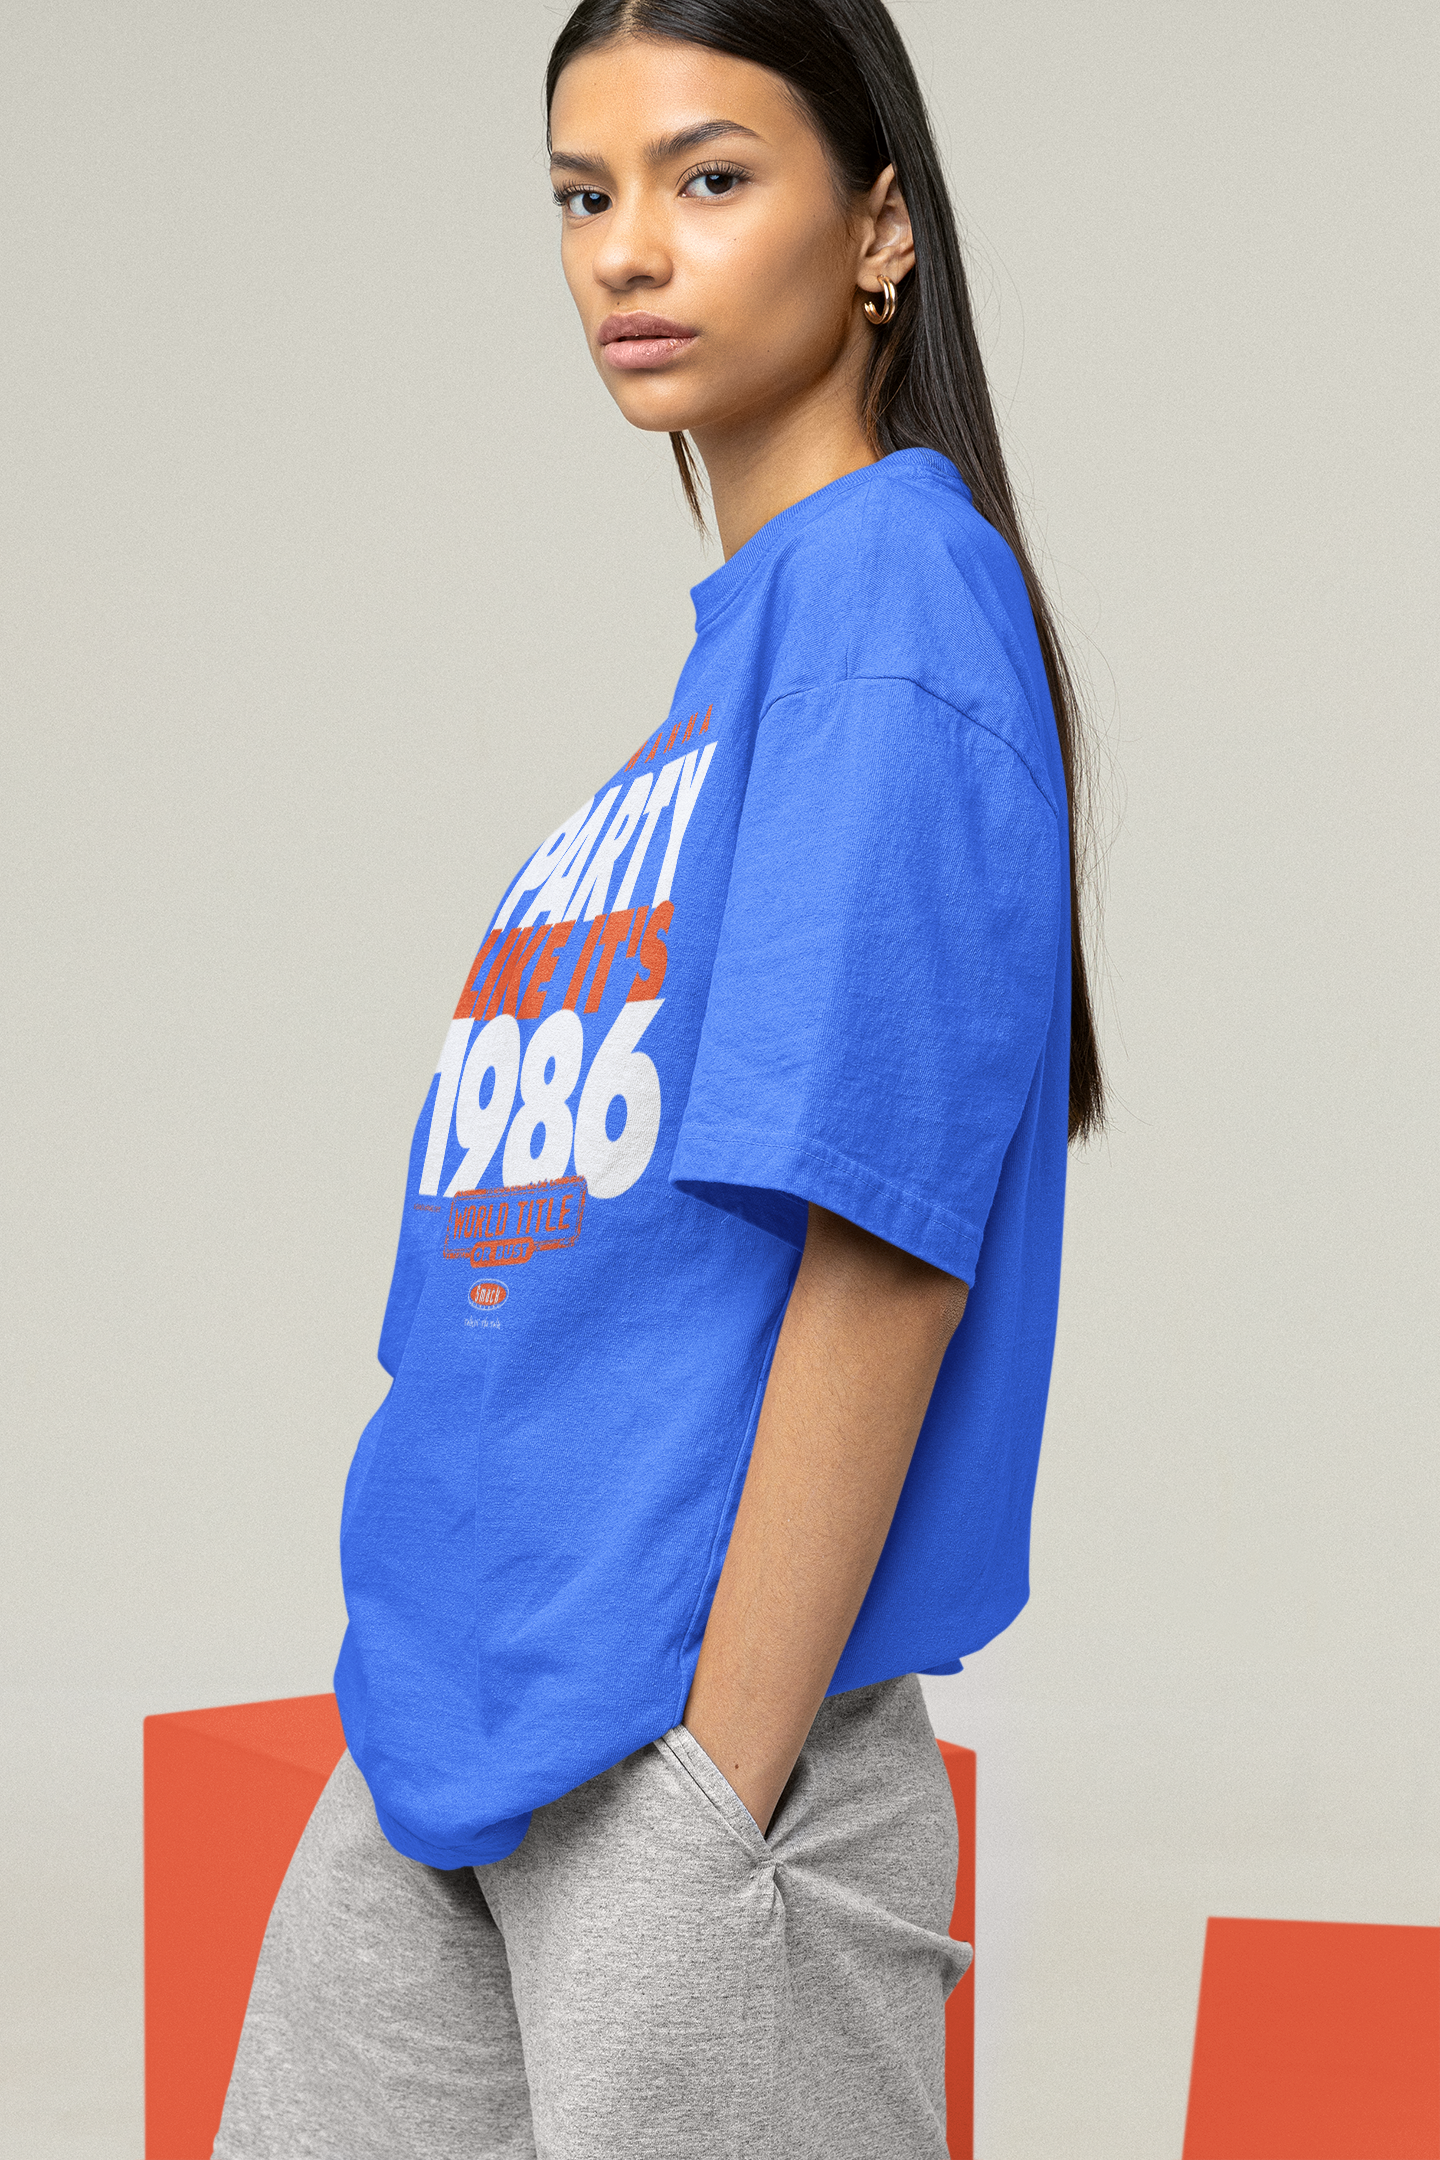 New York Mets Women Small Screened NEW YORK Tee with Shoulder Cut Outs  NYM 86